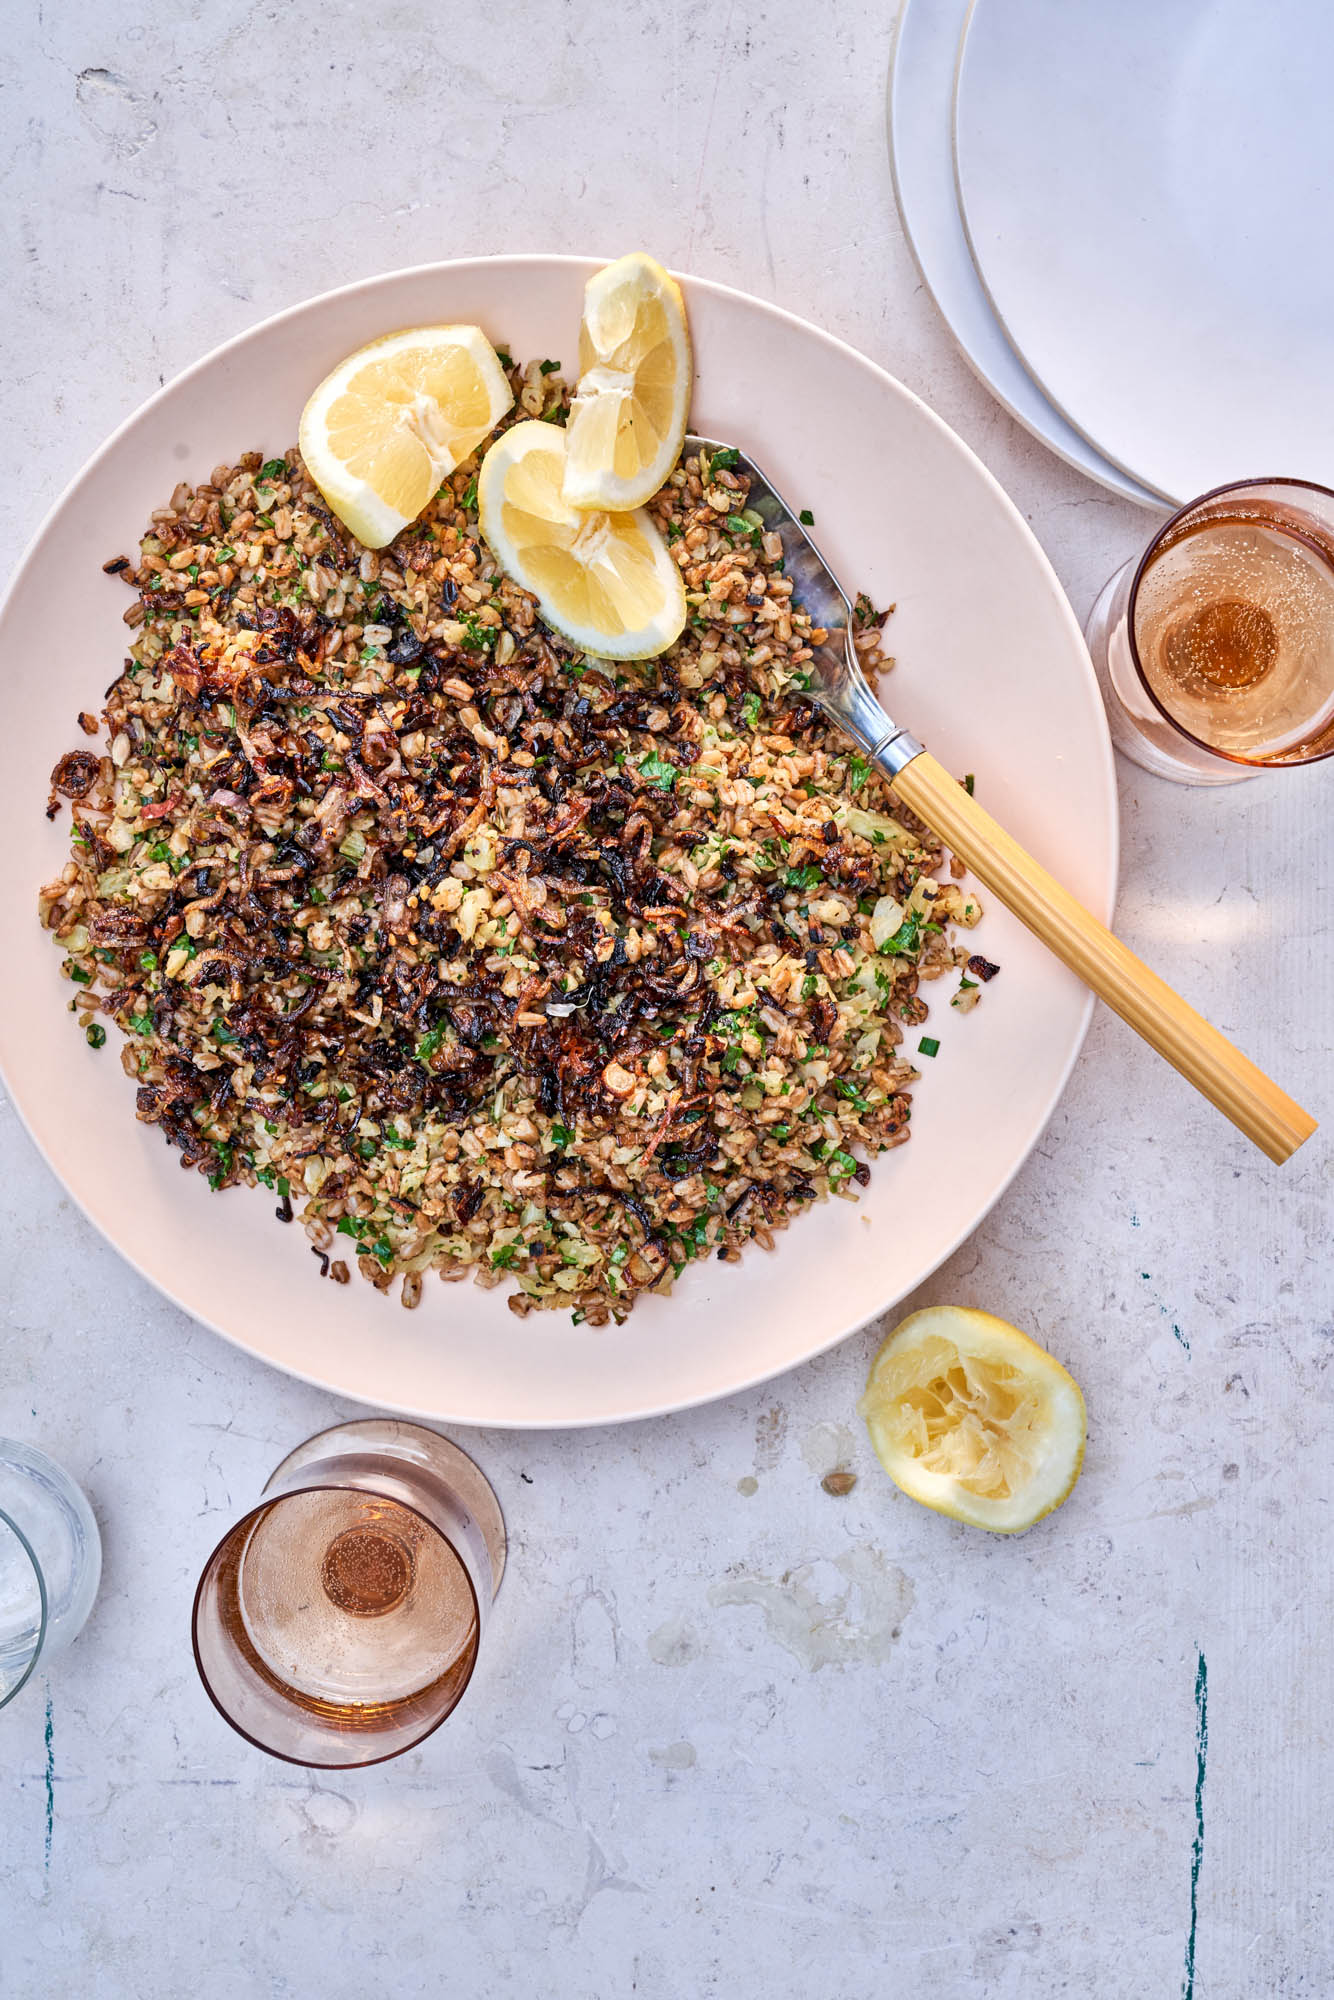 0064_200626_THAT_SOUNDS_SO_GOOD_0064_FRIED_FARRO_GRATED_CAULIFLOWER_SHALLOTS_109